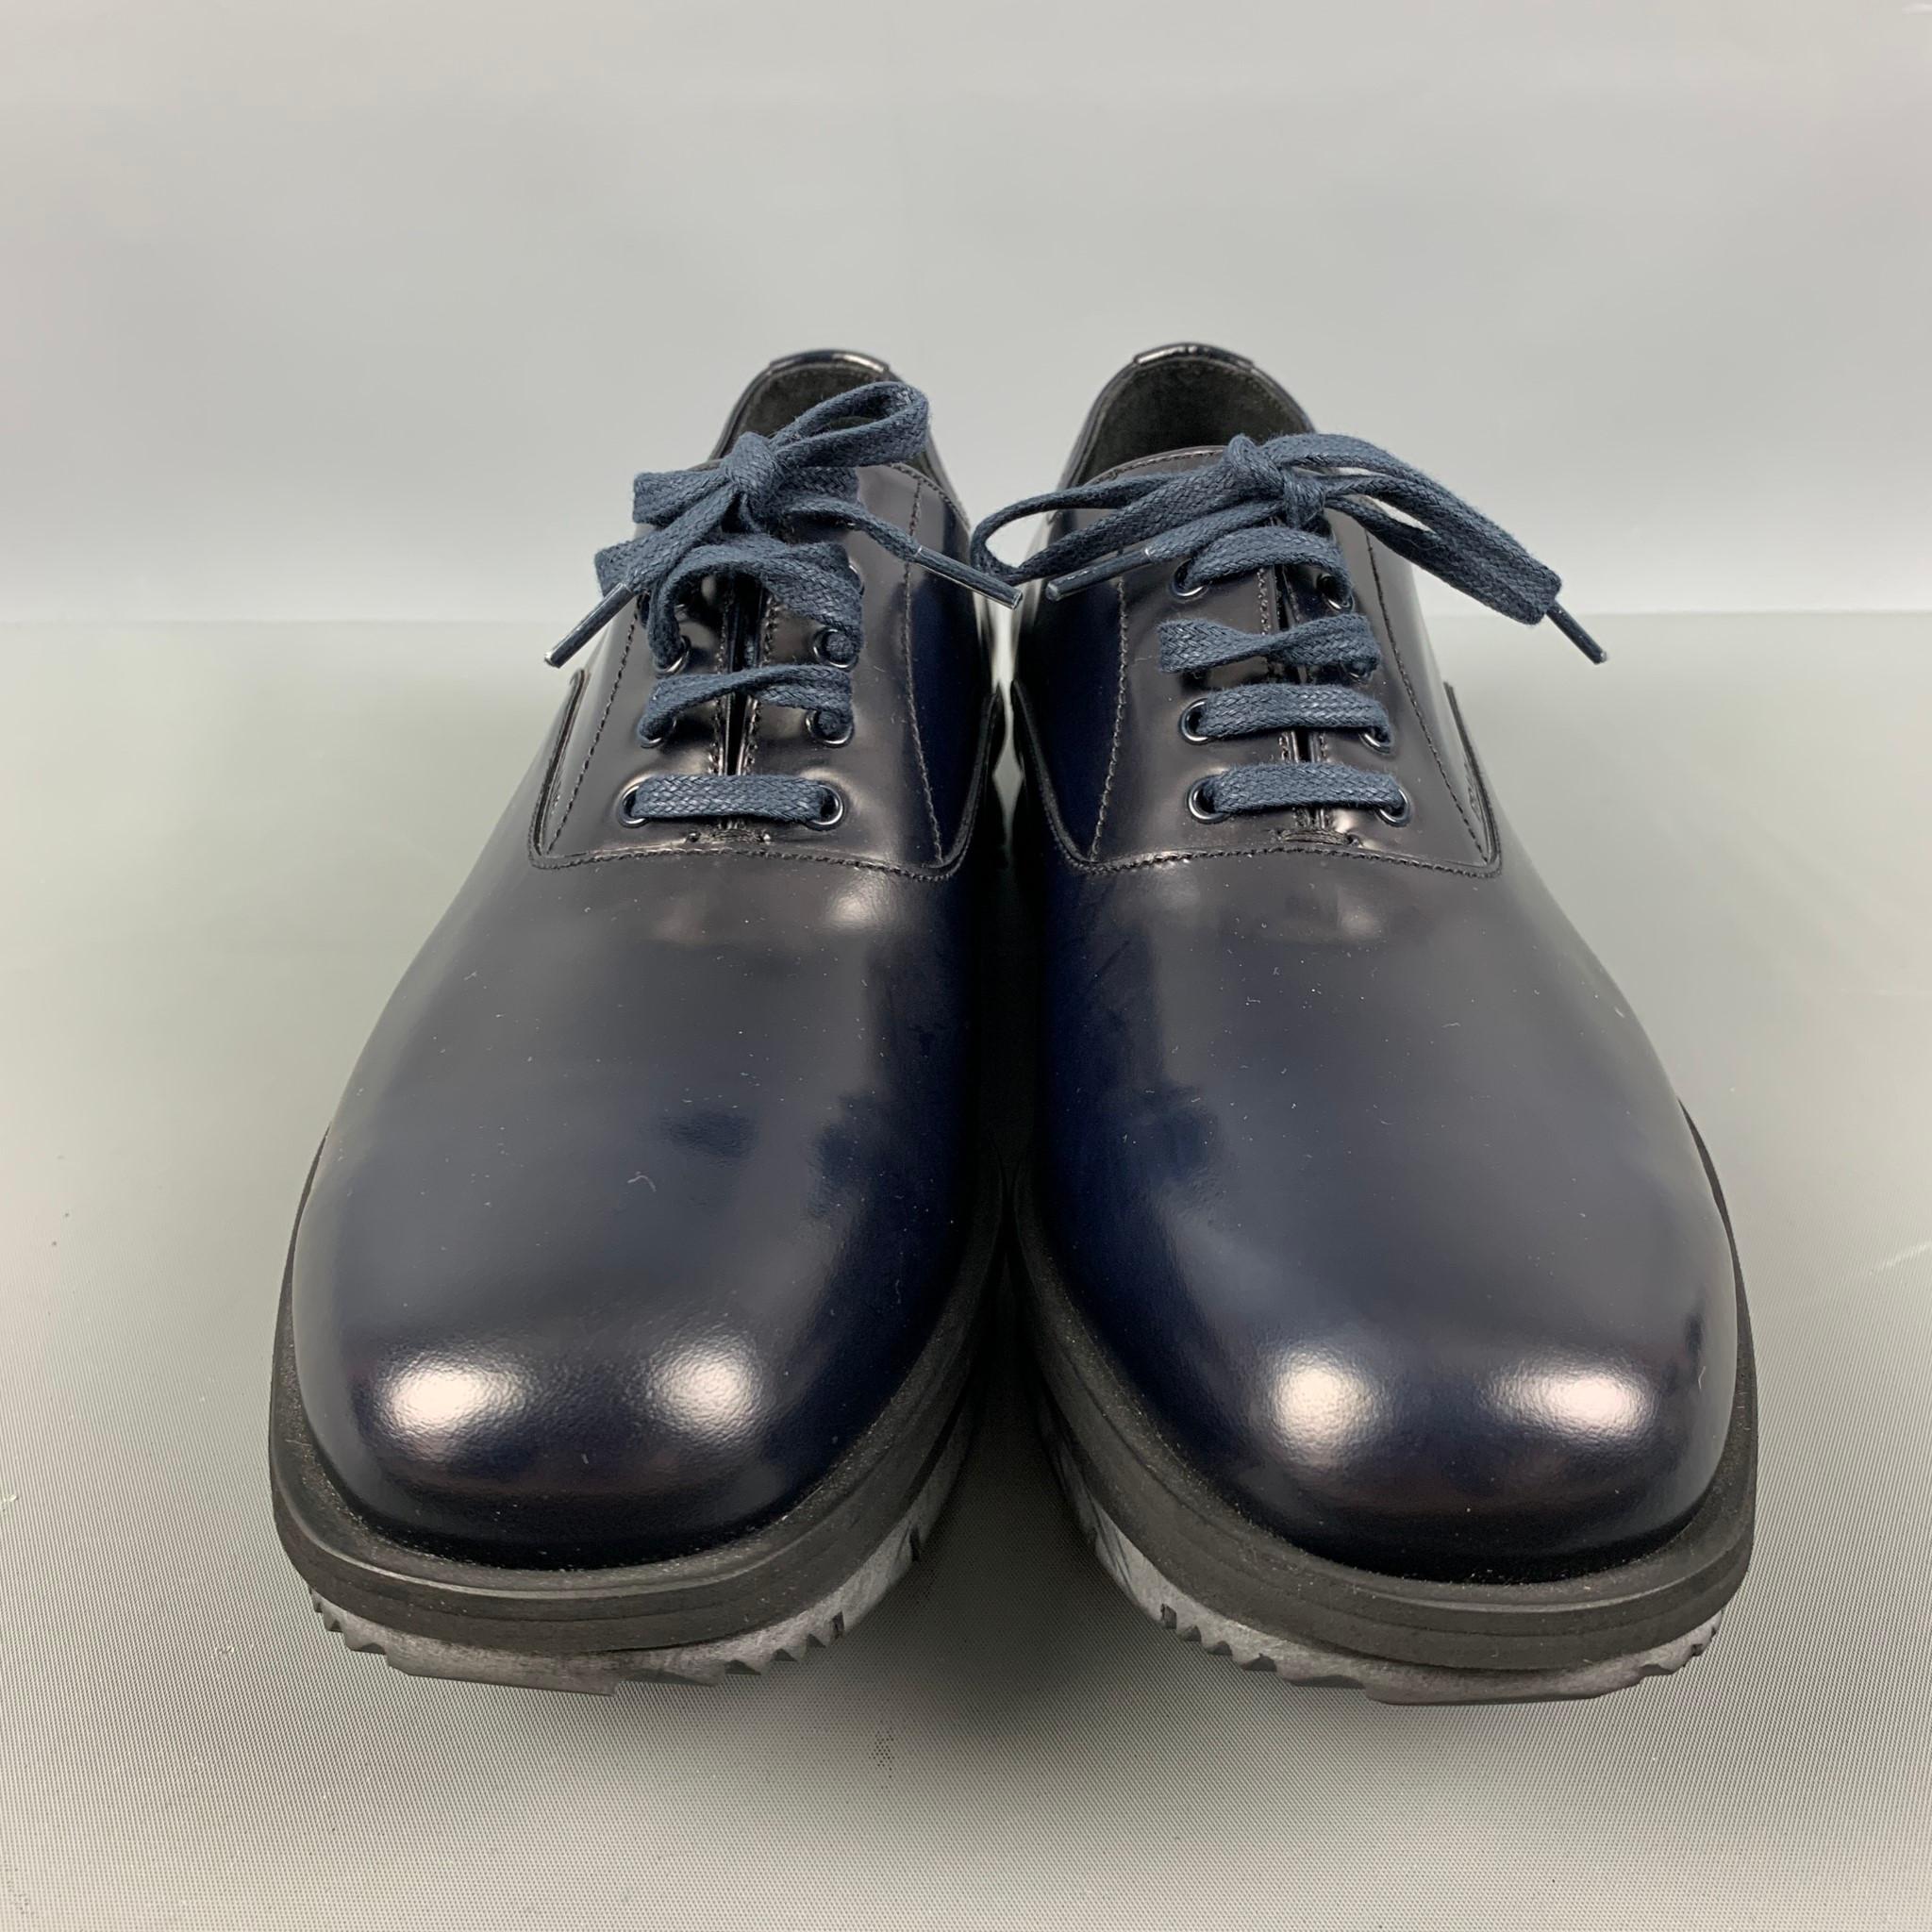 Men's PRADA Size 8.5 Navy Leather Lace Up Shoes